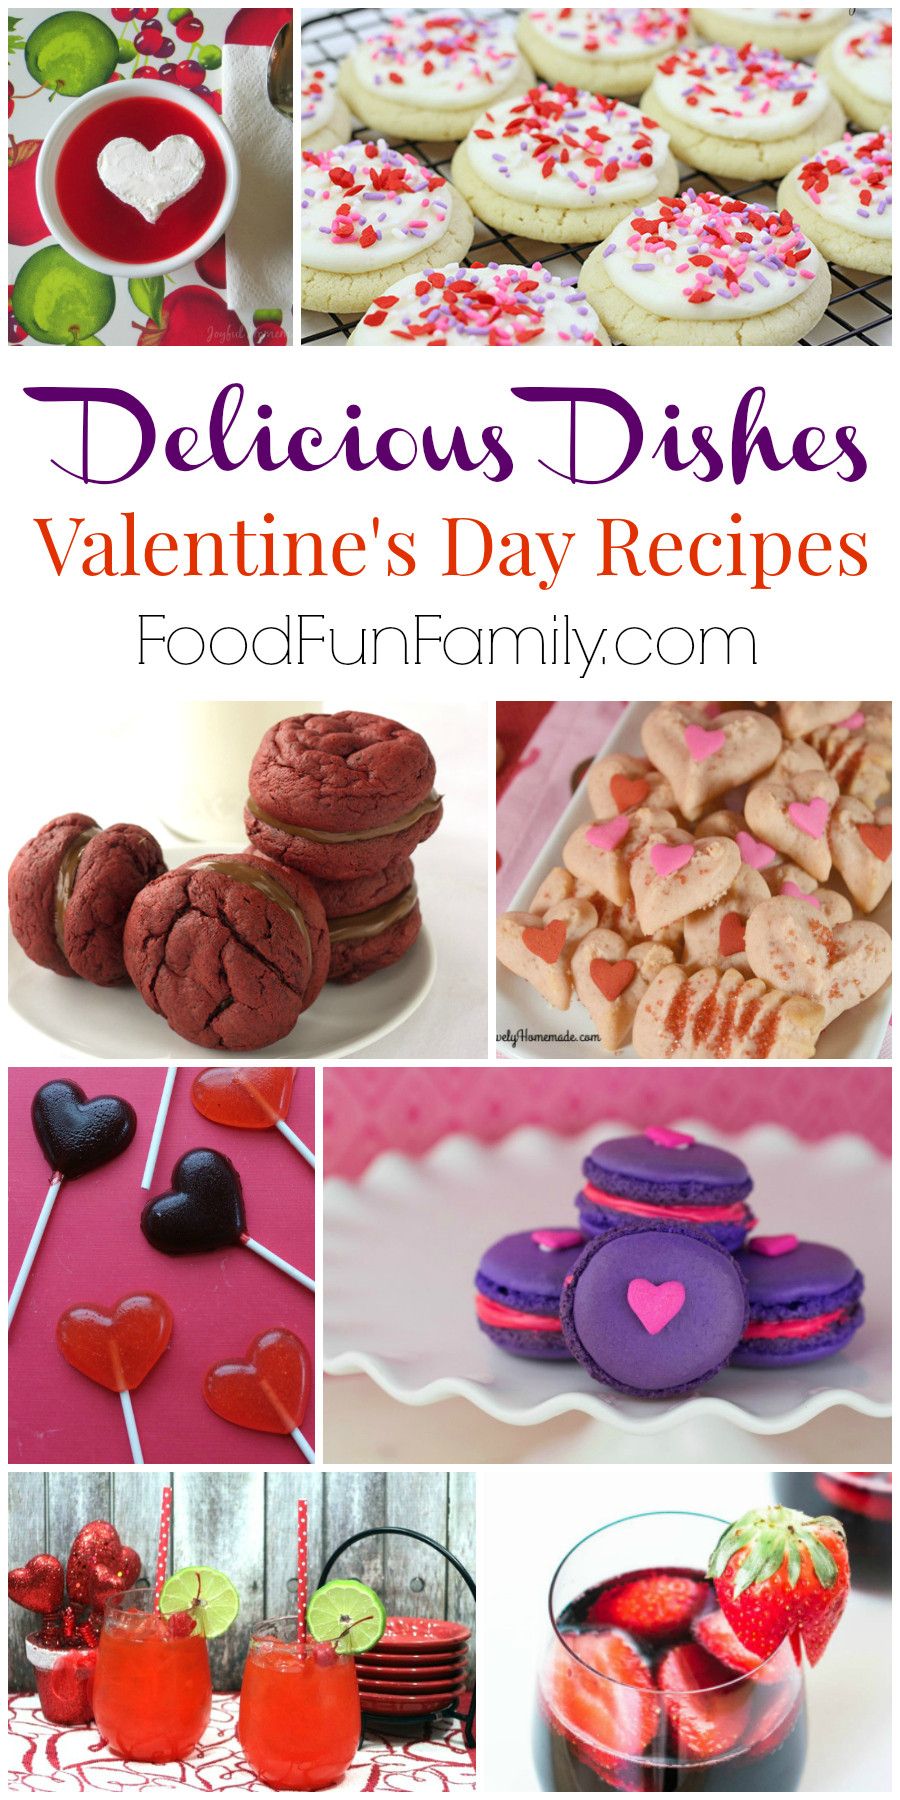 Valentines Day Party Food
 Fun Valentine’s Day Recipes – Delicious Dishes Recipe Party